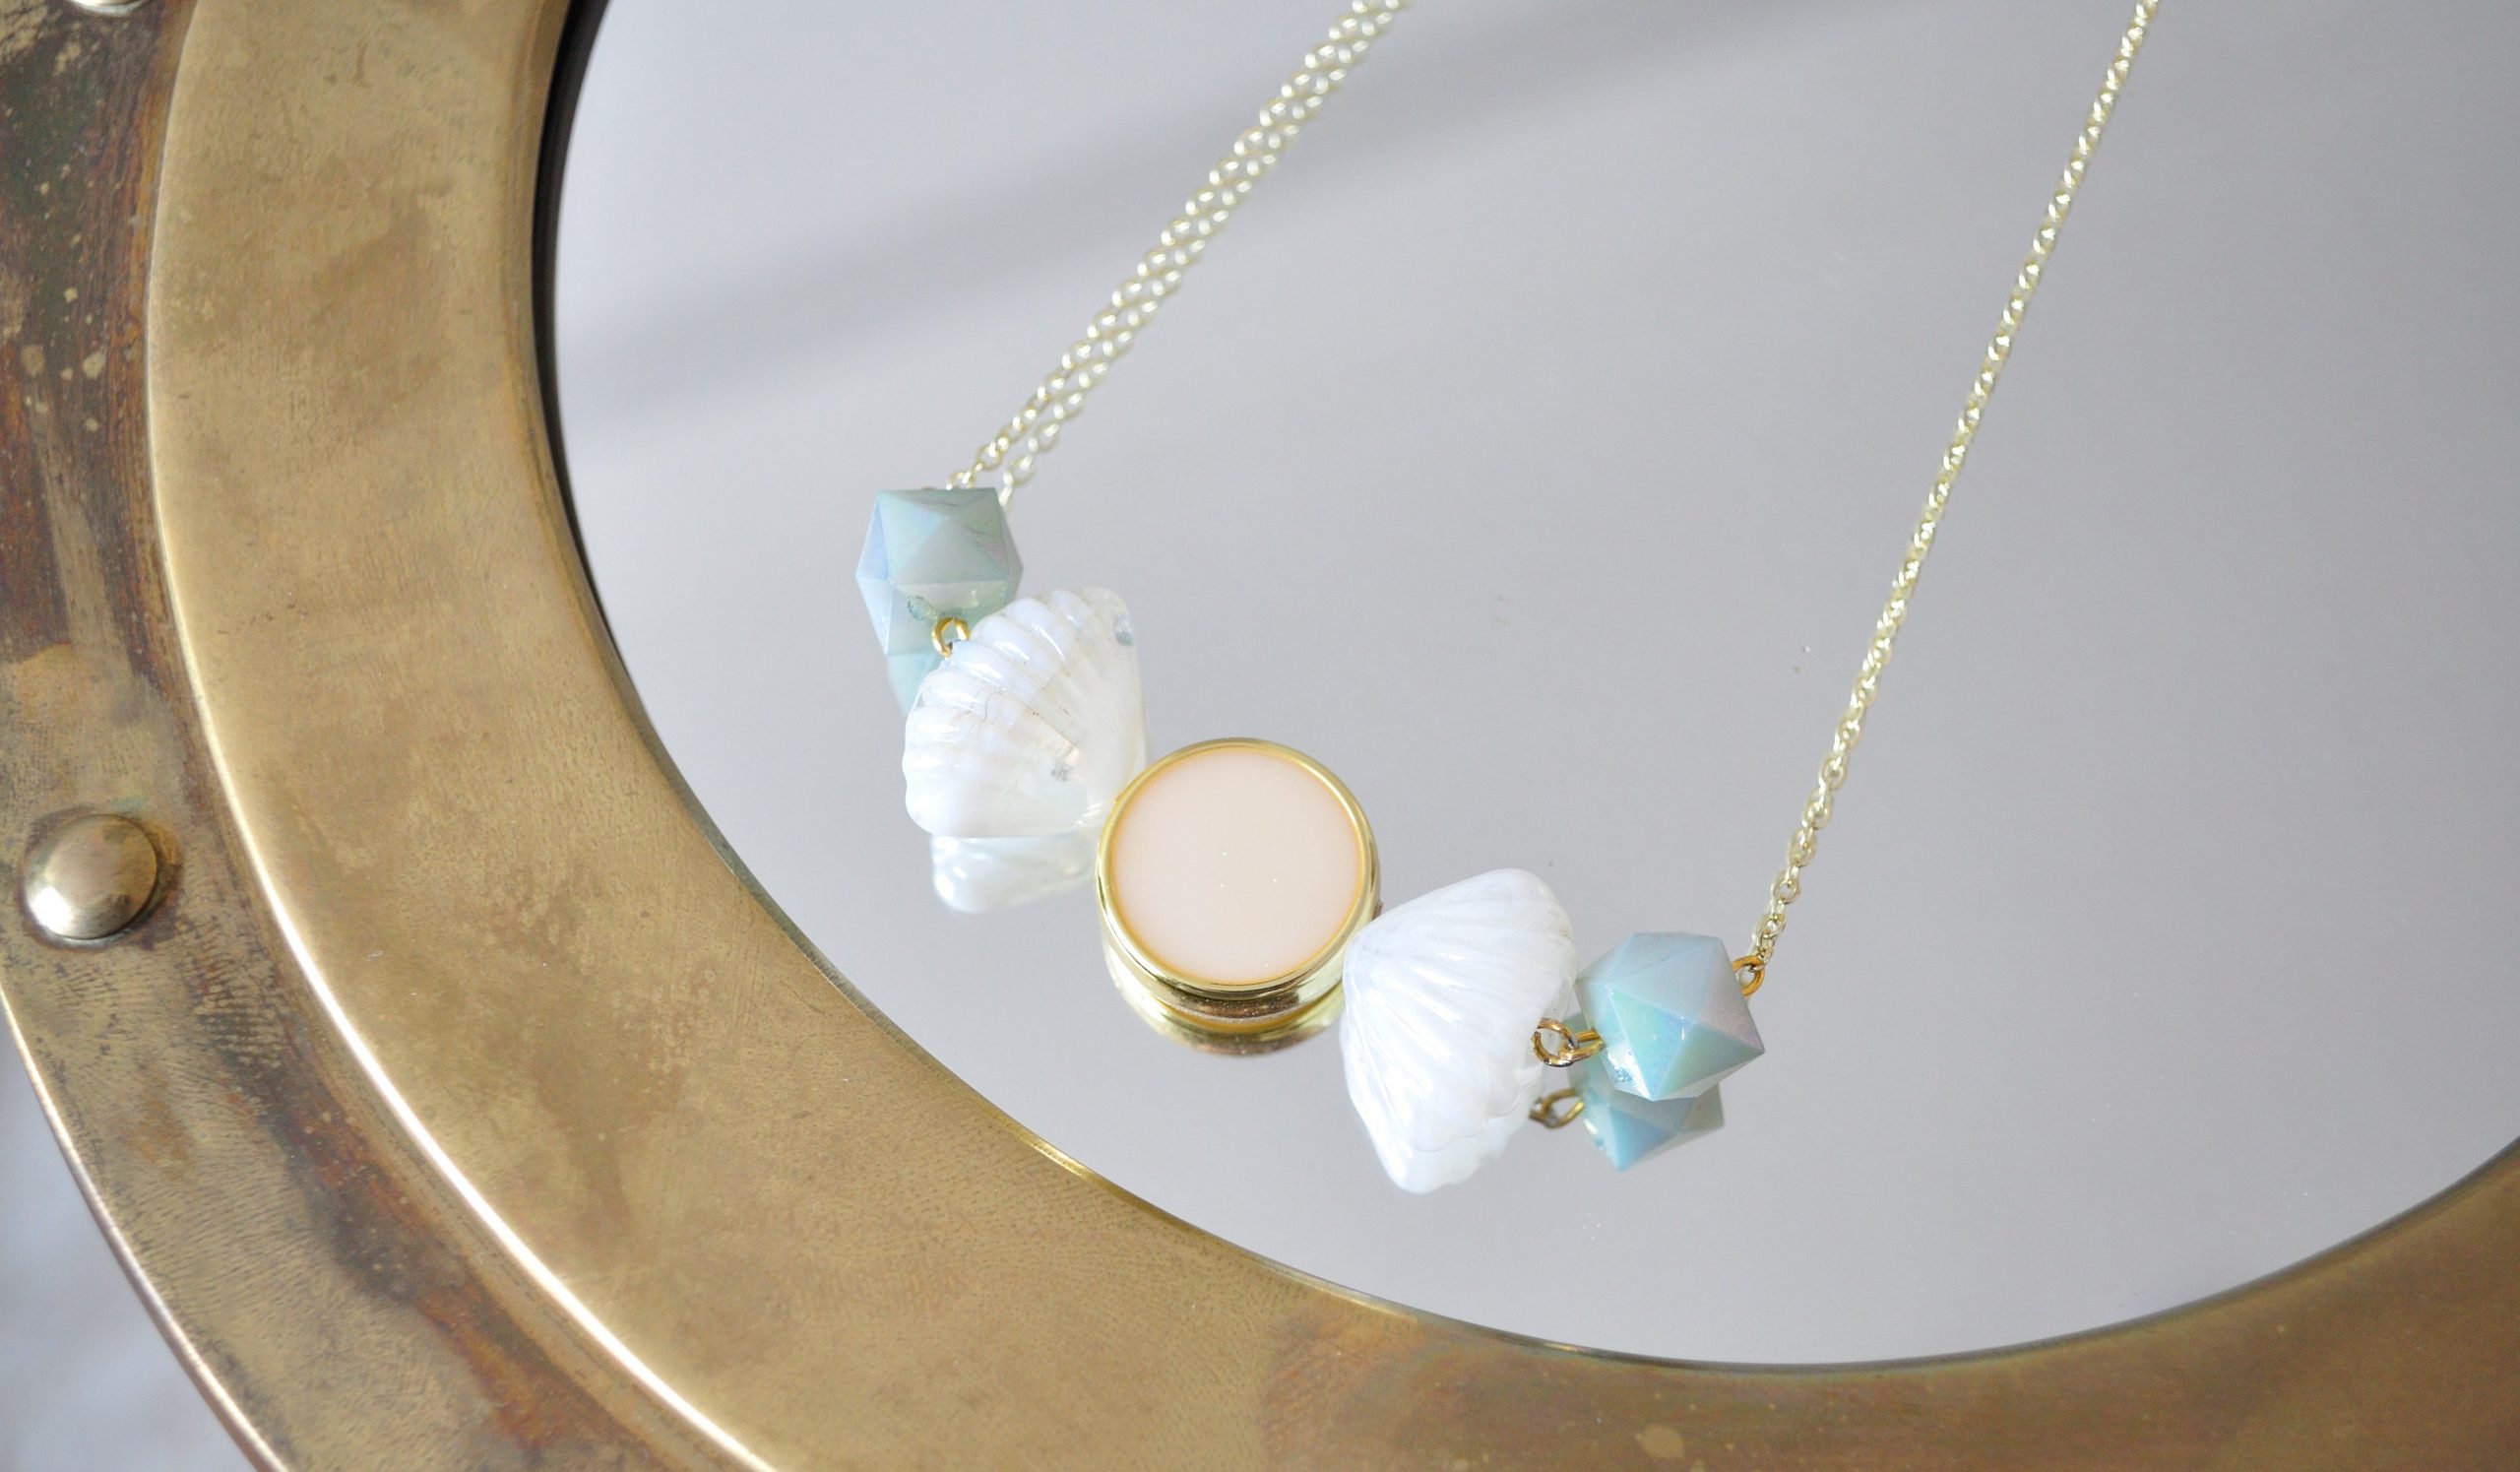 fine, gold-plated necklace Art Deco style in white and mint